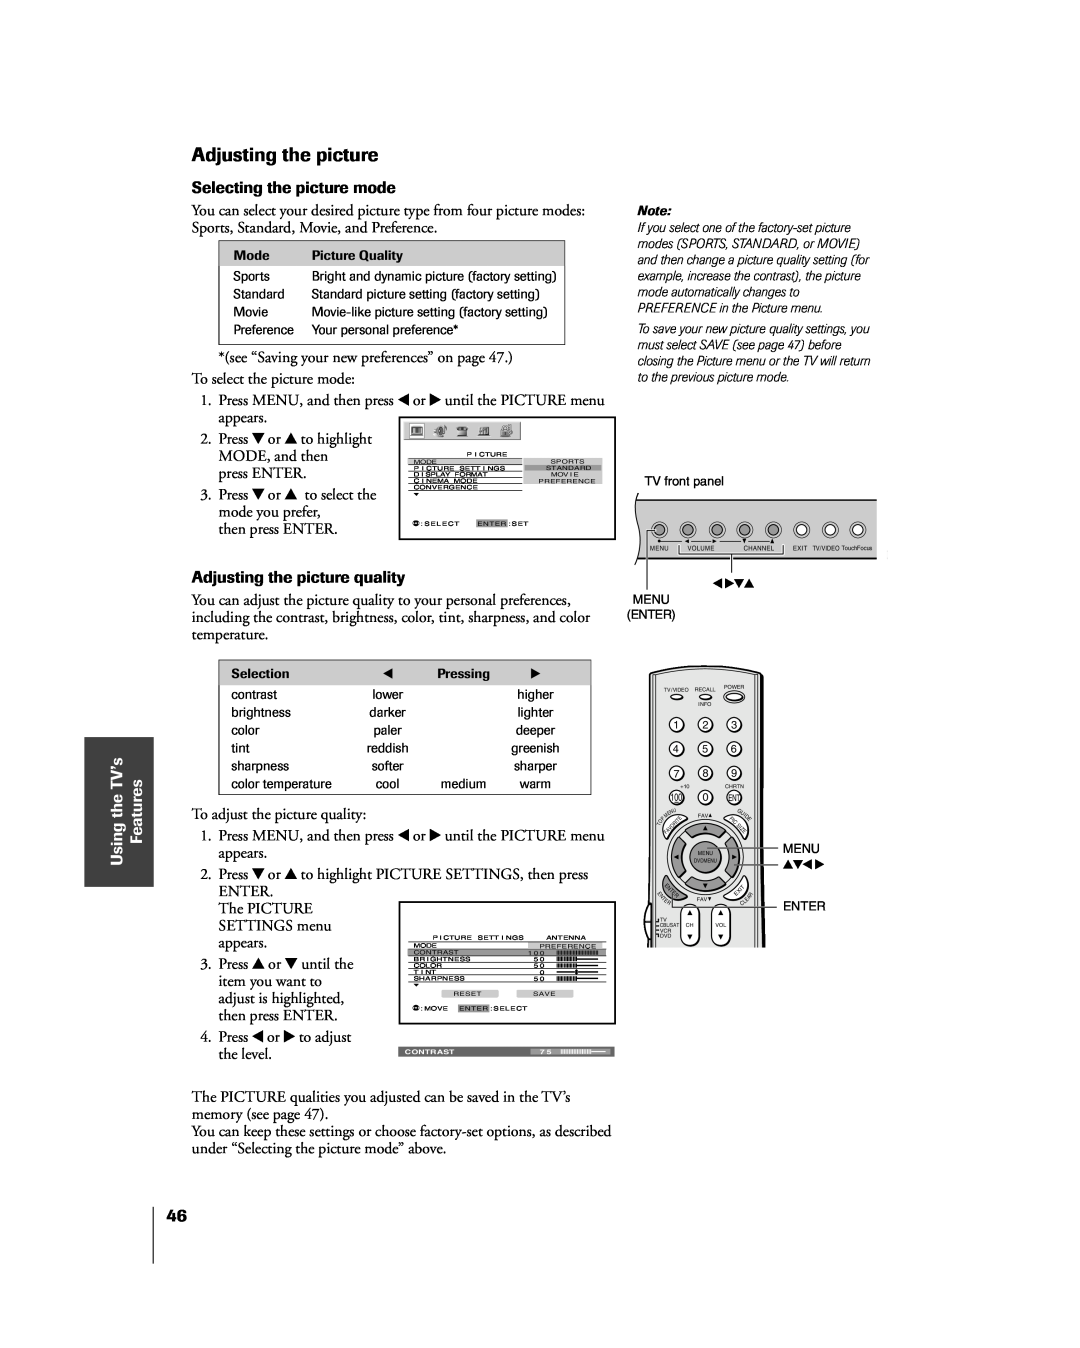 Toshiba 51H85C, 65H85C, 57H85C owner manual Selecting the picture mode, Adjusting the picture quality, the TVÕs 